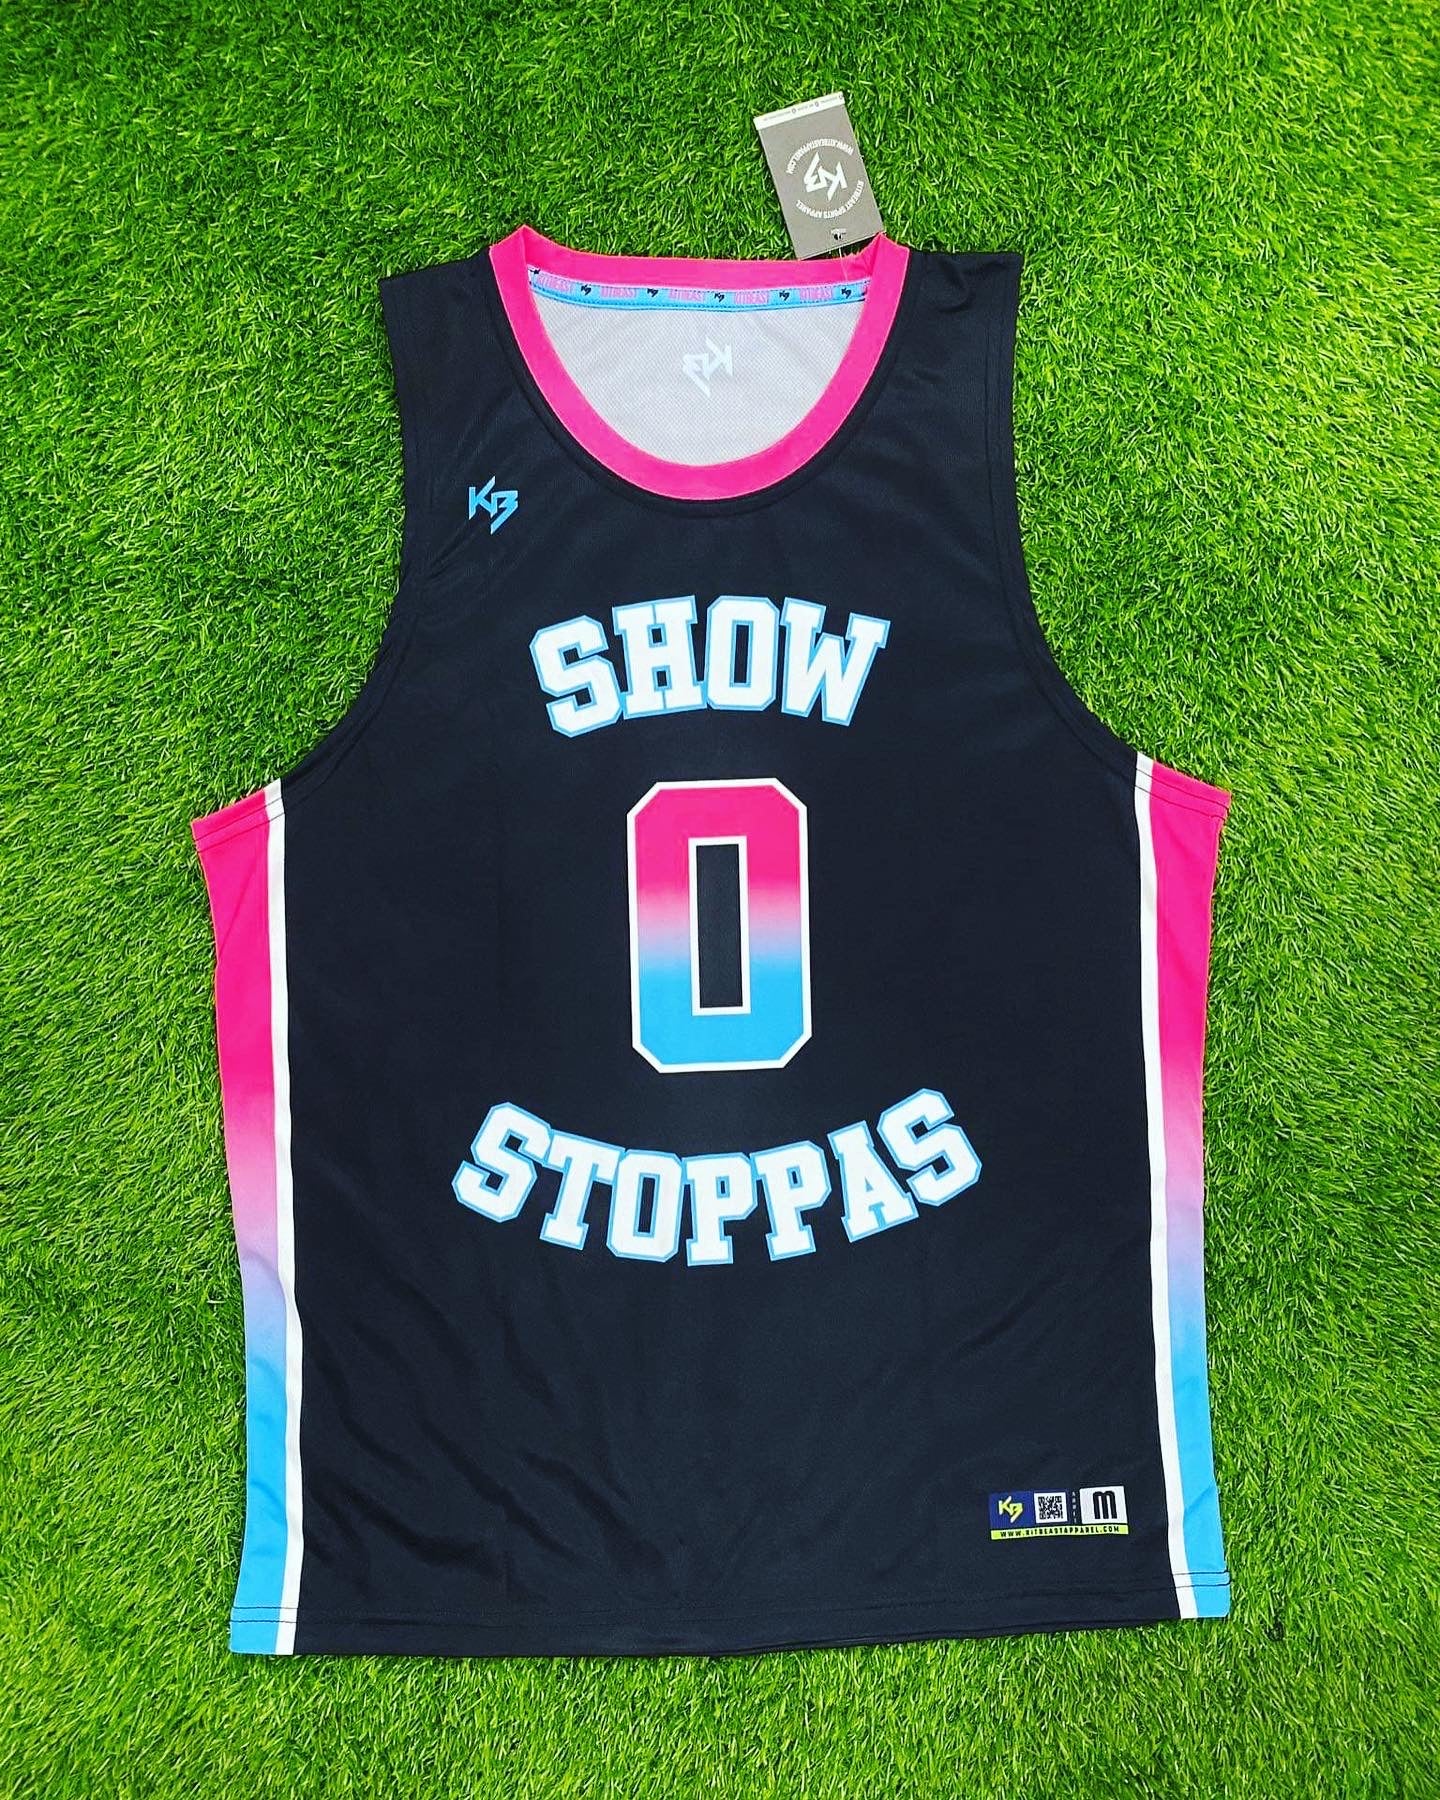 miami basketball jersey pink and blue